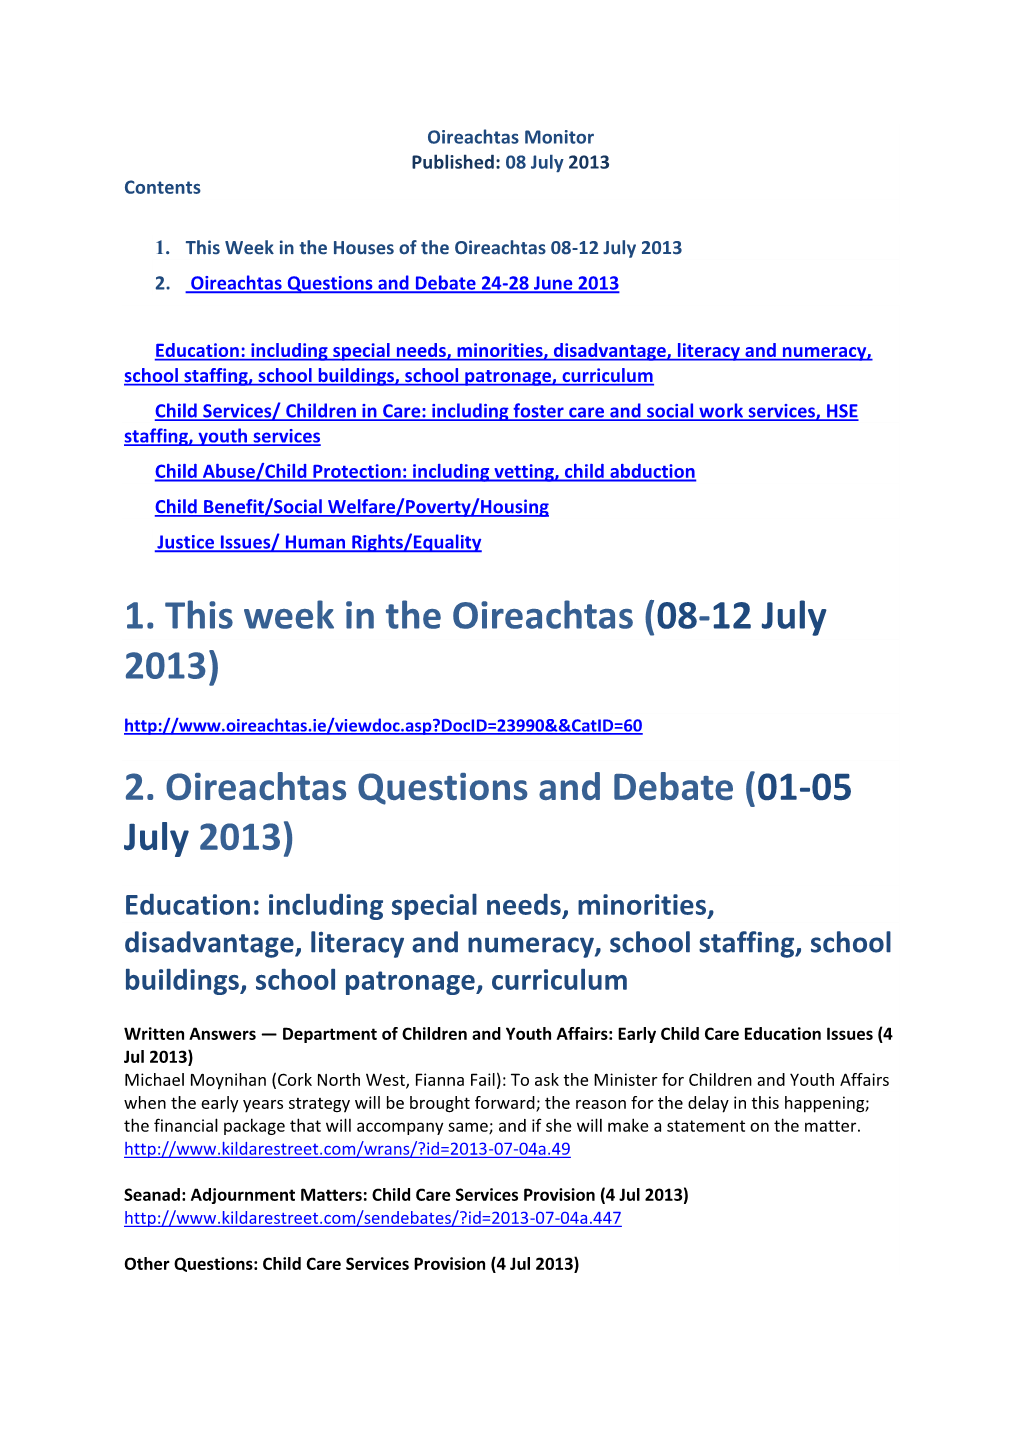 2. Oireachtas Questions and Debate (01-05 July 2013)